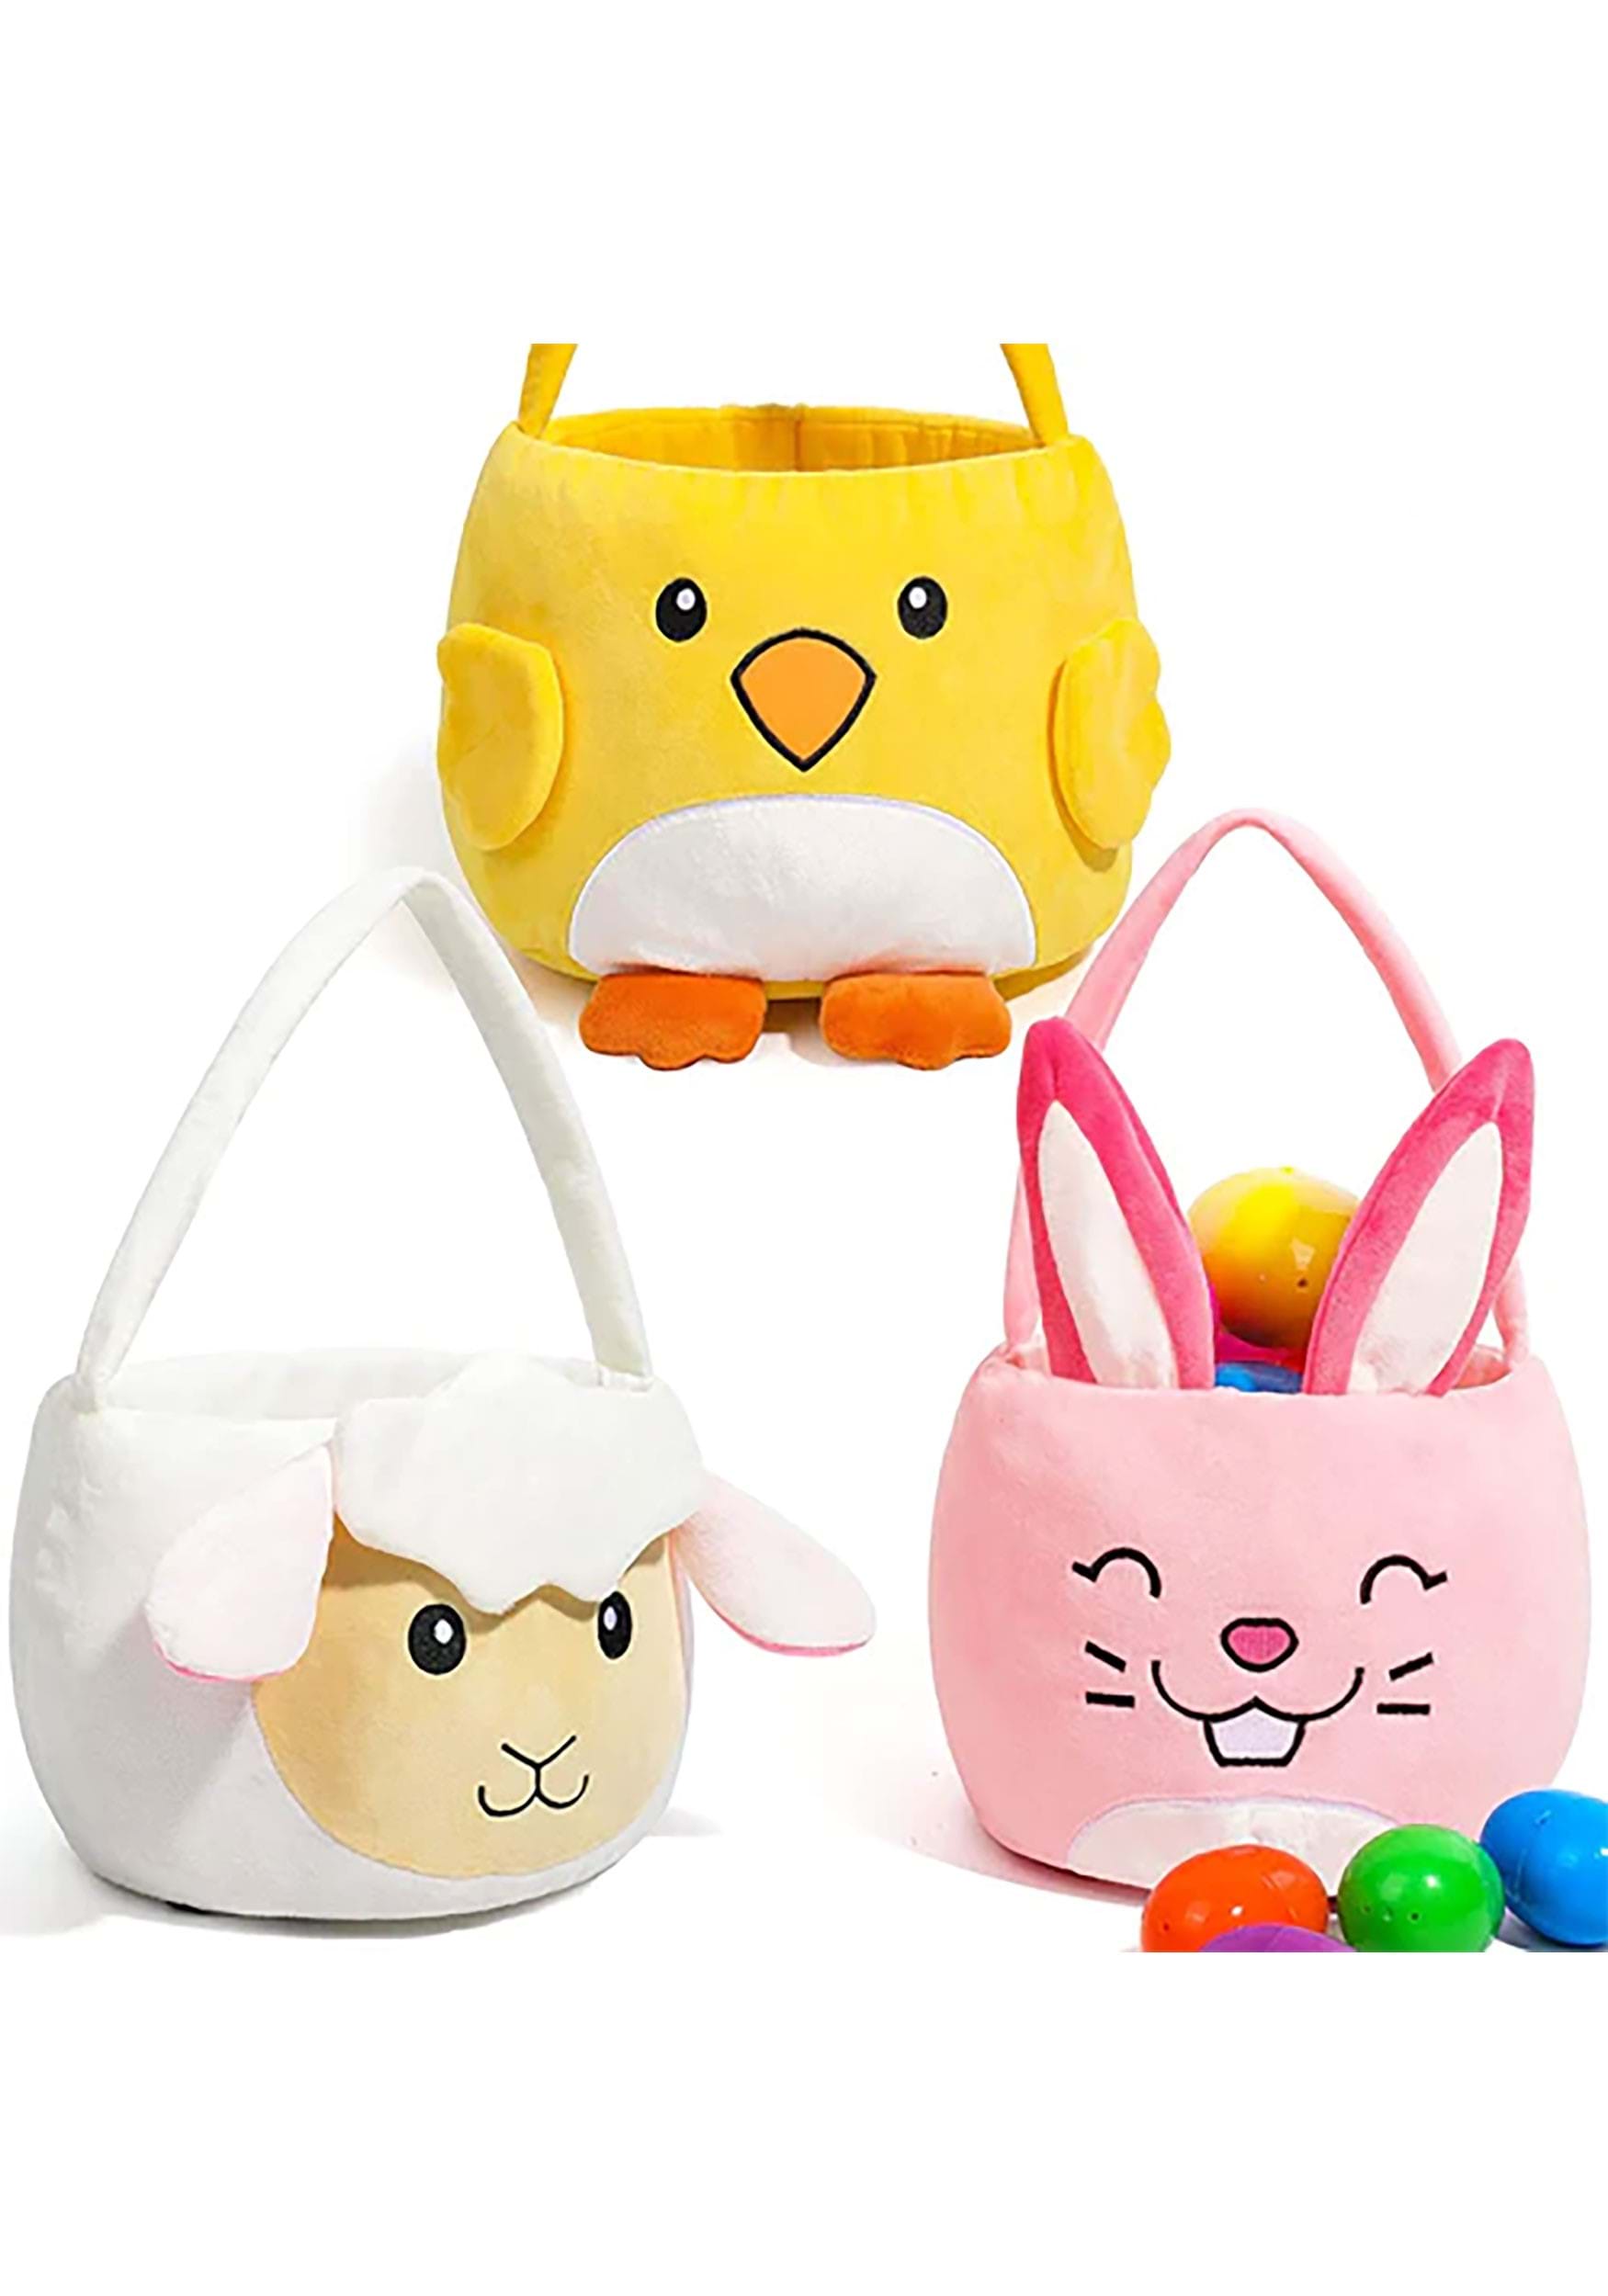 3 Pack Chicken, Bunny, and Sheep Basket Set